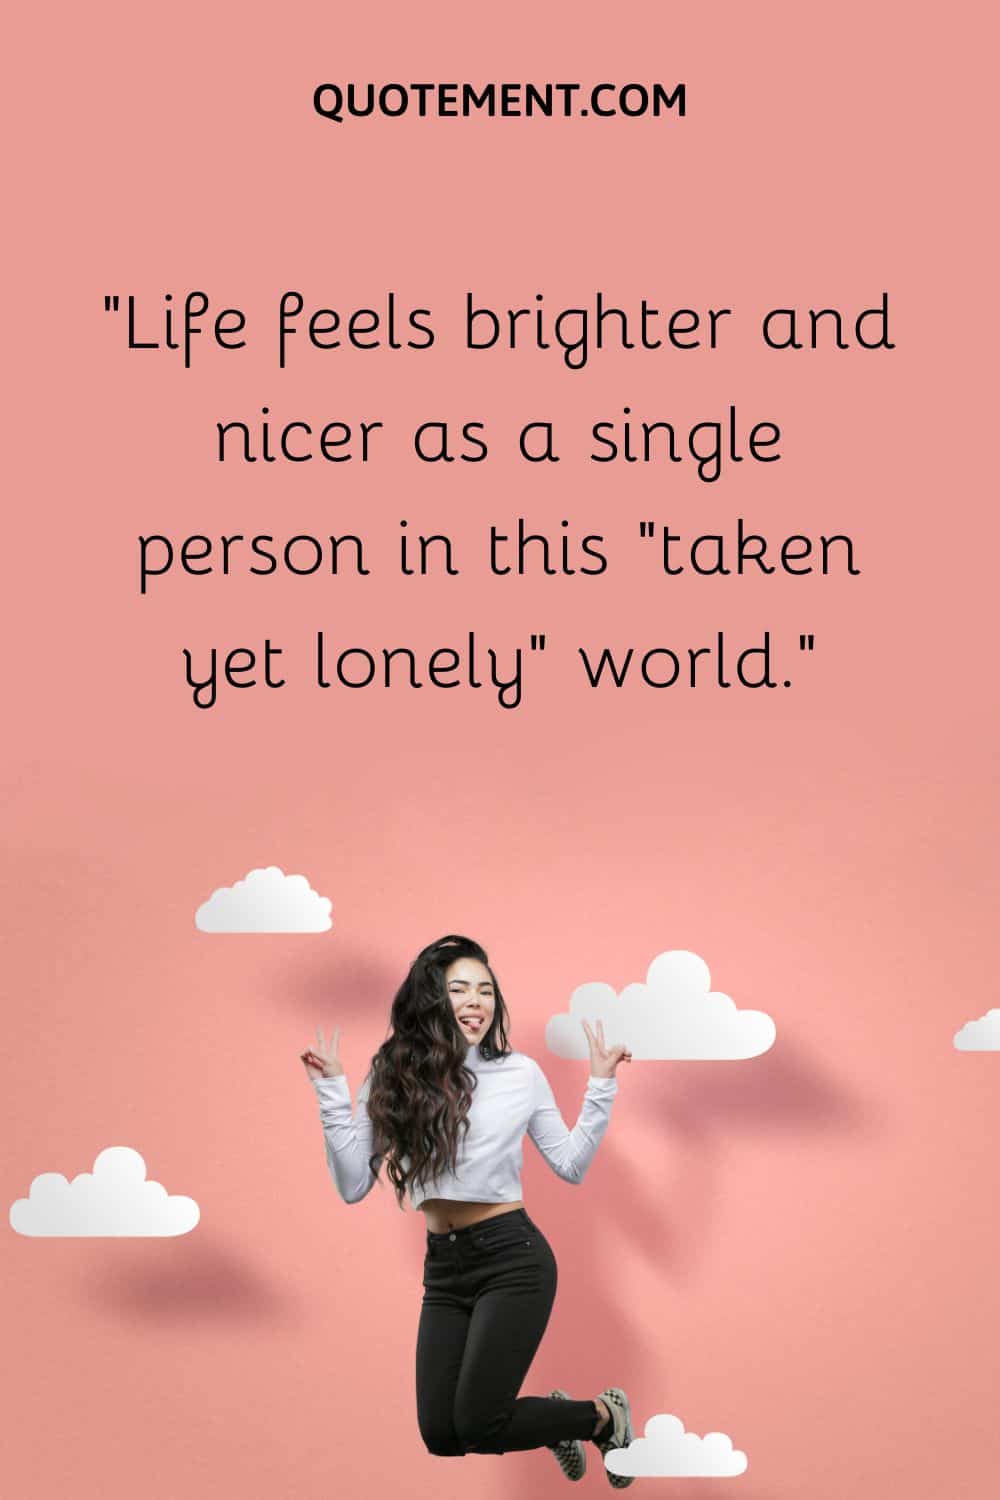 Life feels brighter and nicer as a single person